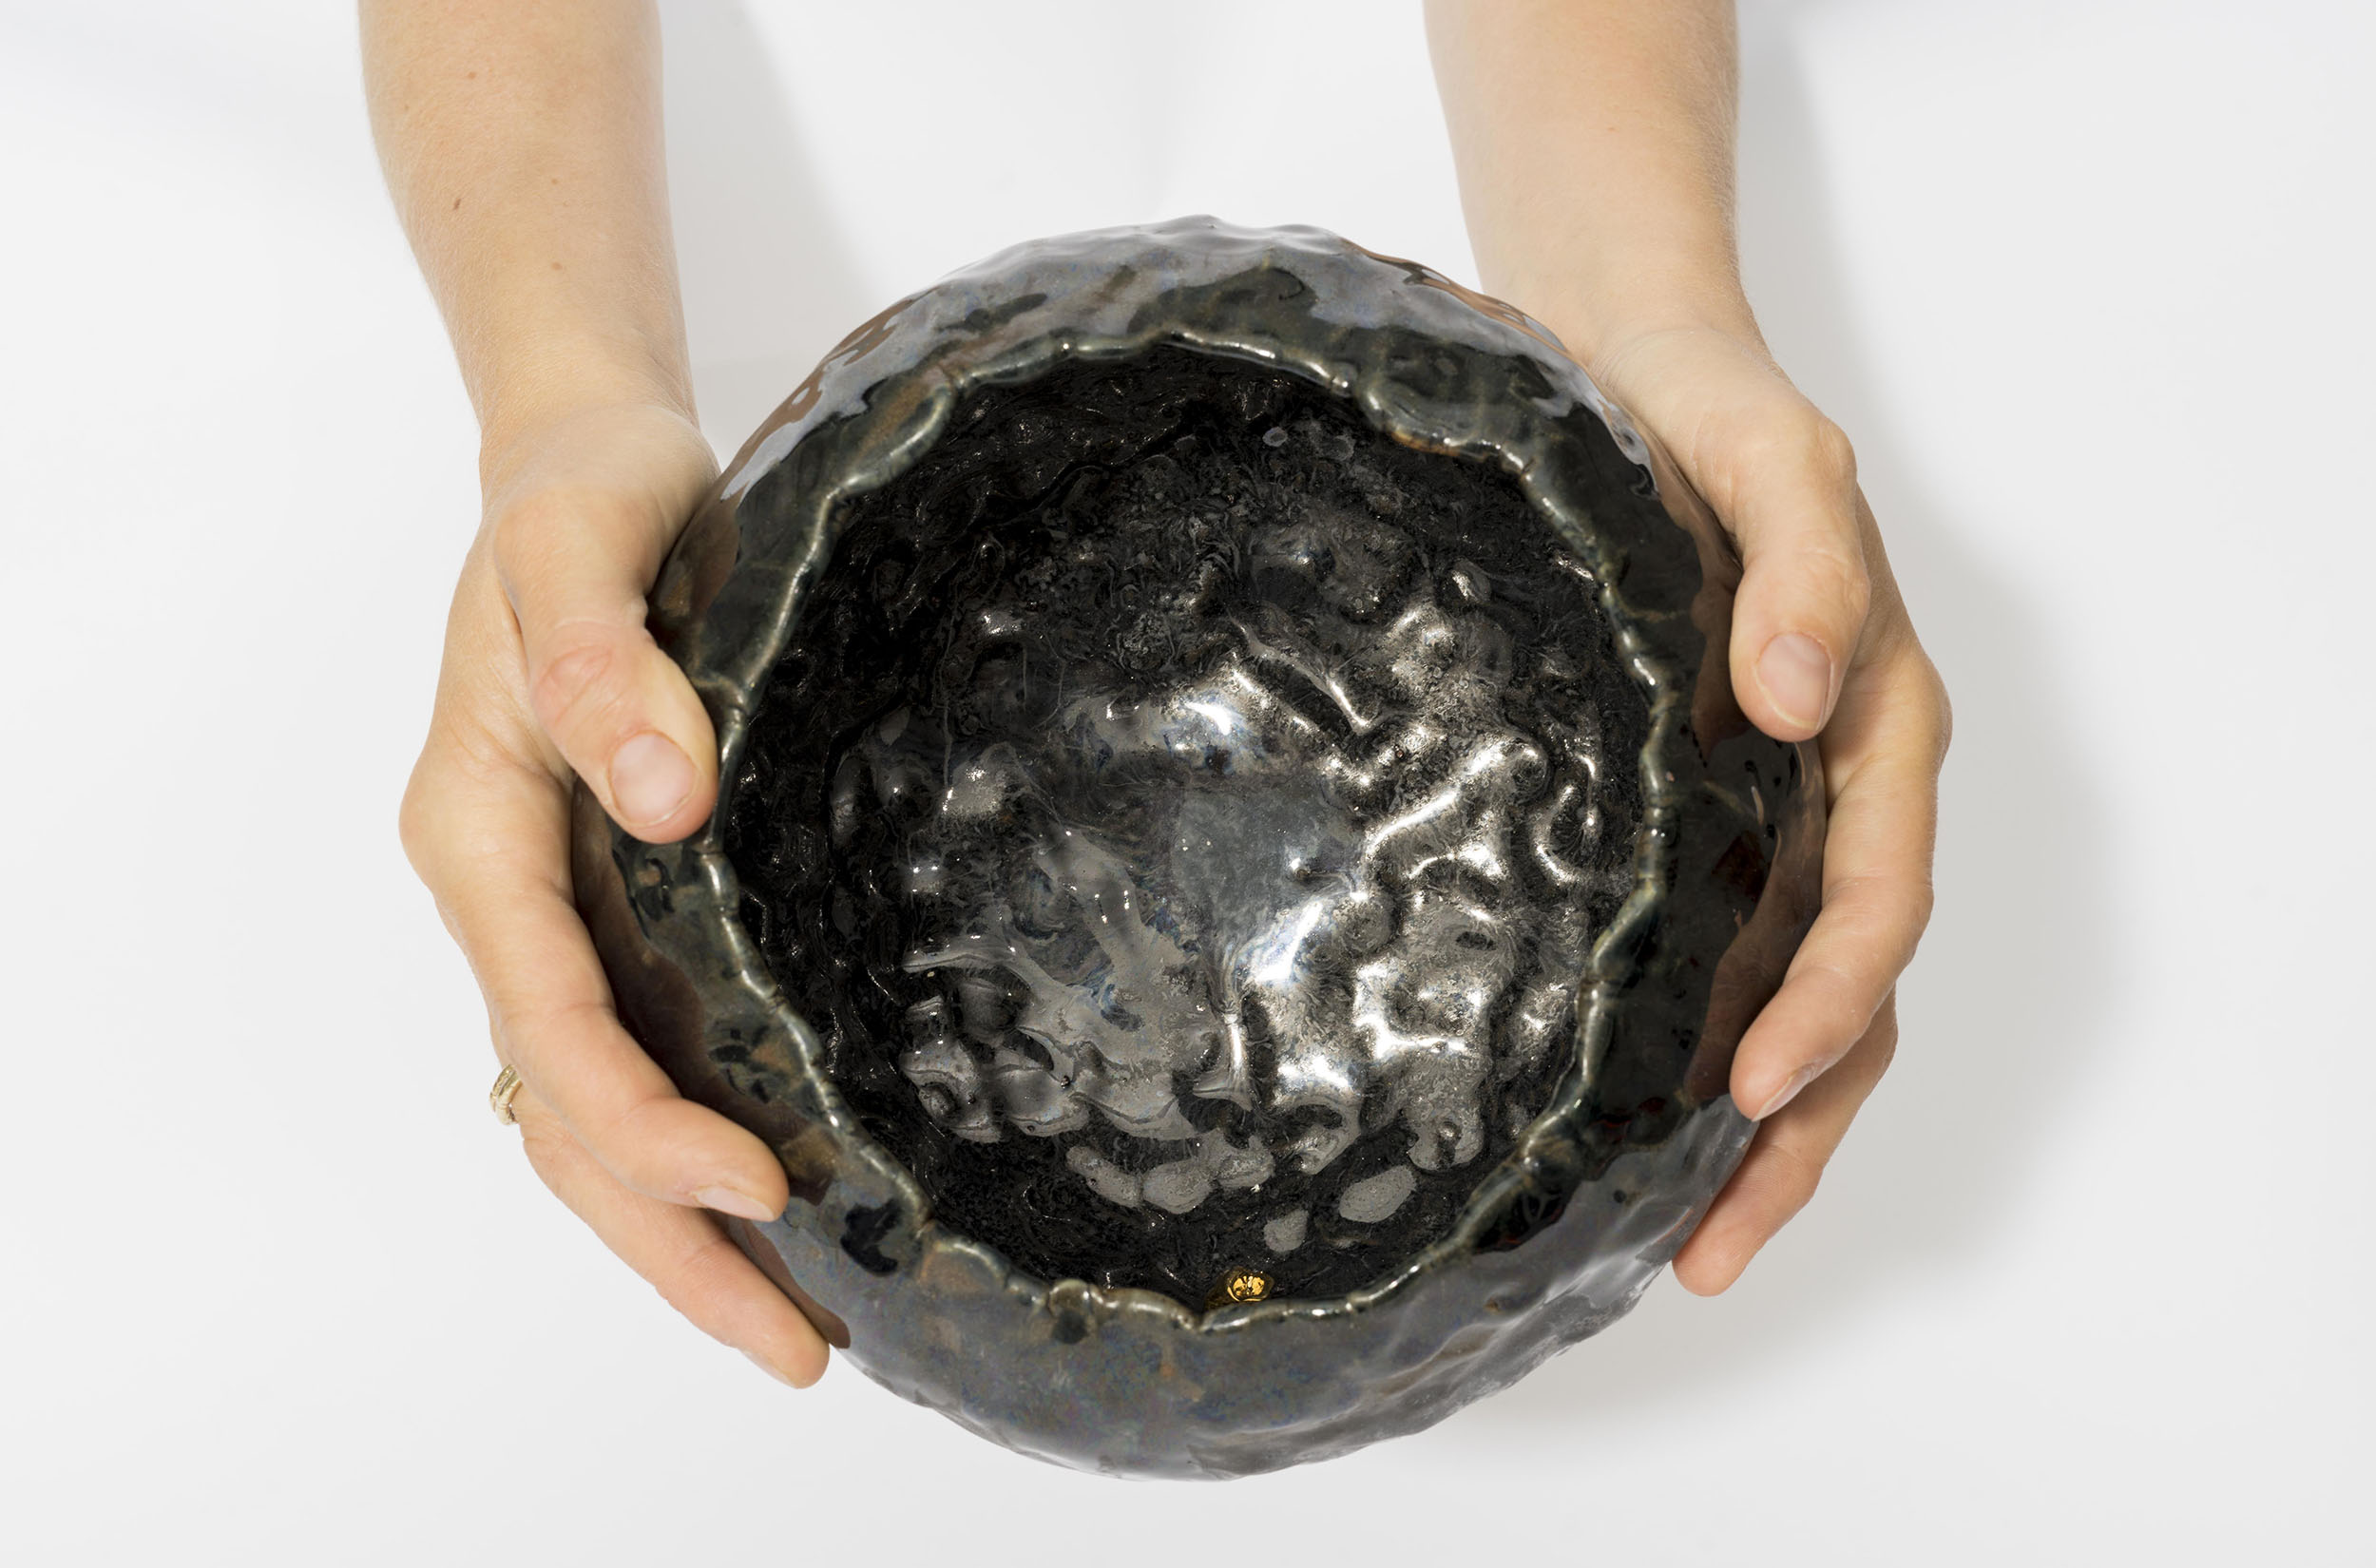 Two hands hold a ceramic art piece that resembles a crater or rough bowl. It is glazed in dark, glossy black and gold.